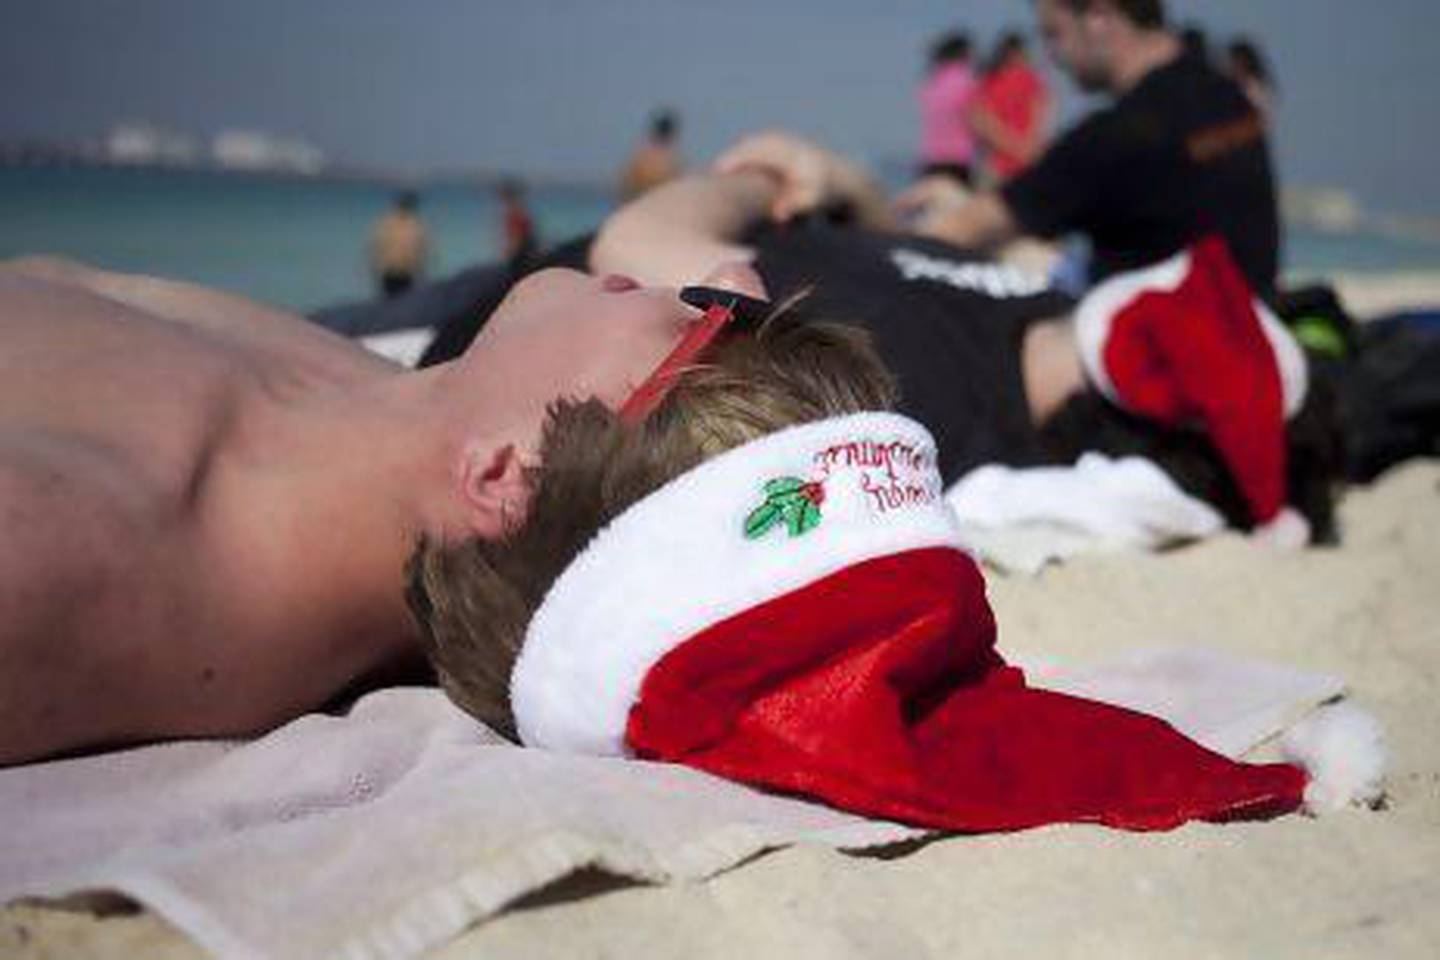 Nick Cifranic, 19, a student at the Rochester Institute of Technology, at JBR beach on Christmas day while on a study abroad programme from New York. Razan Alzayani / The National